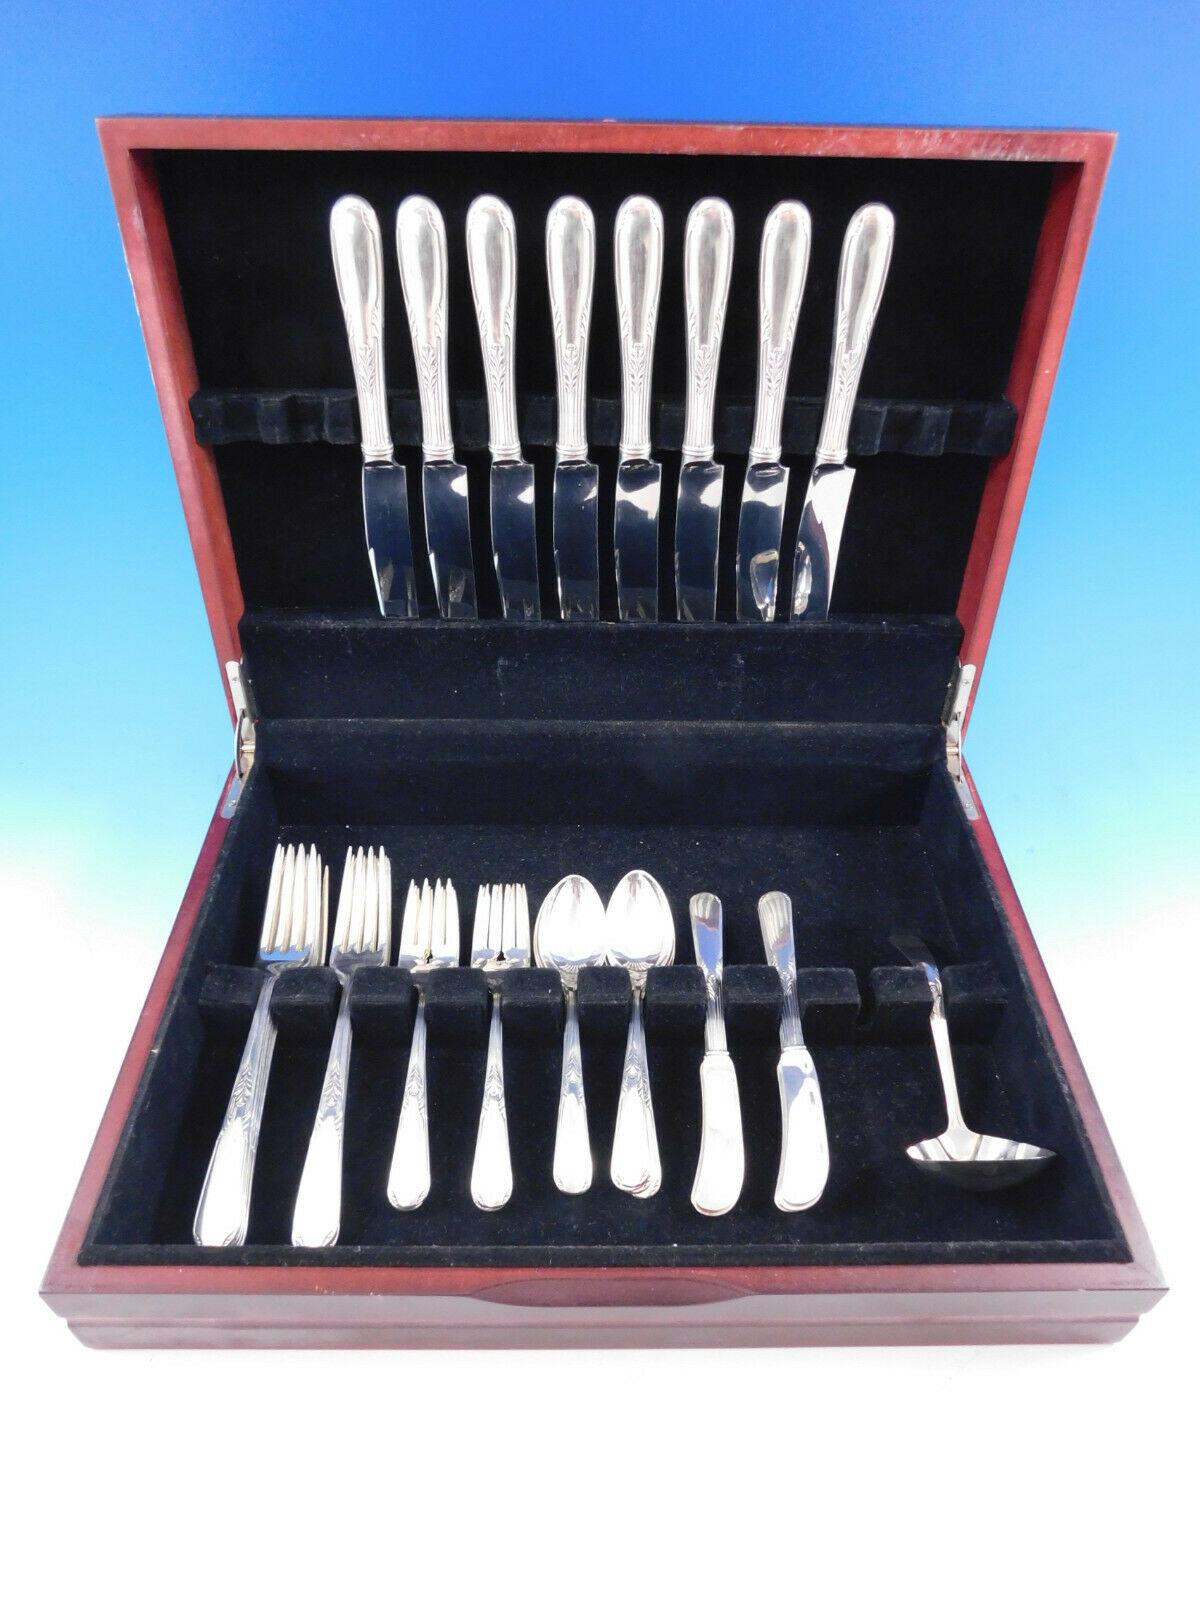 Dinner size Fleetwood by Manchester sterling silver flatware set - 41 pieces. This set includes:

8 dinner size knives, 9 5/8